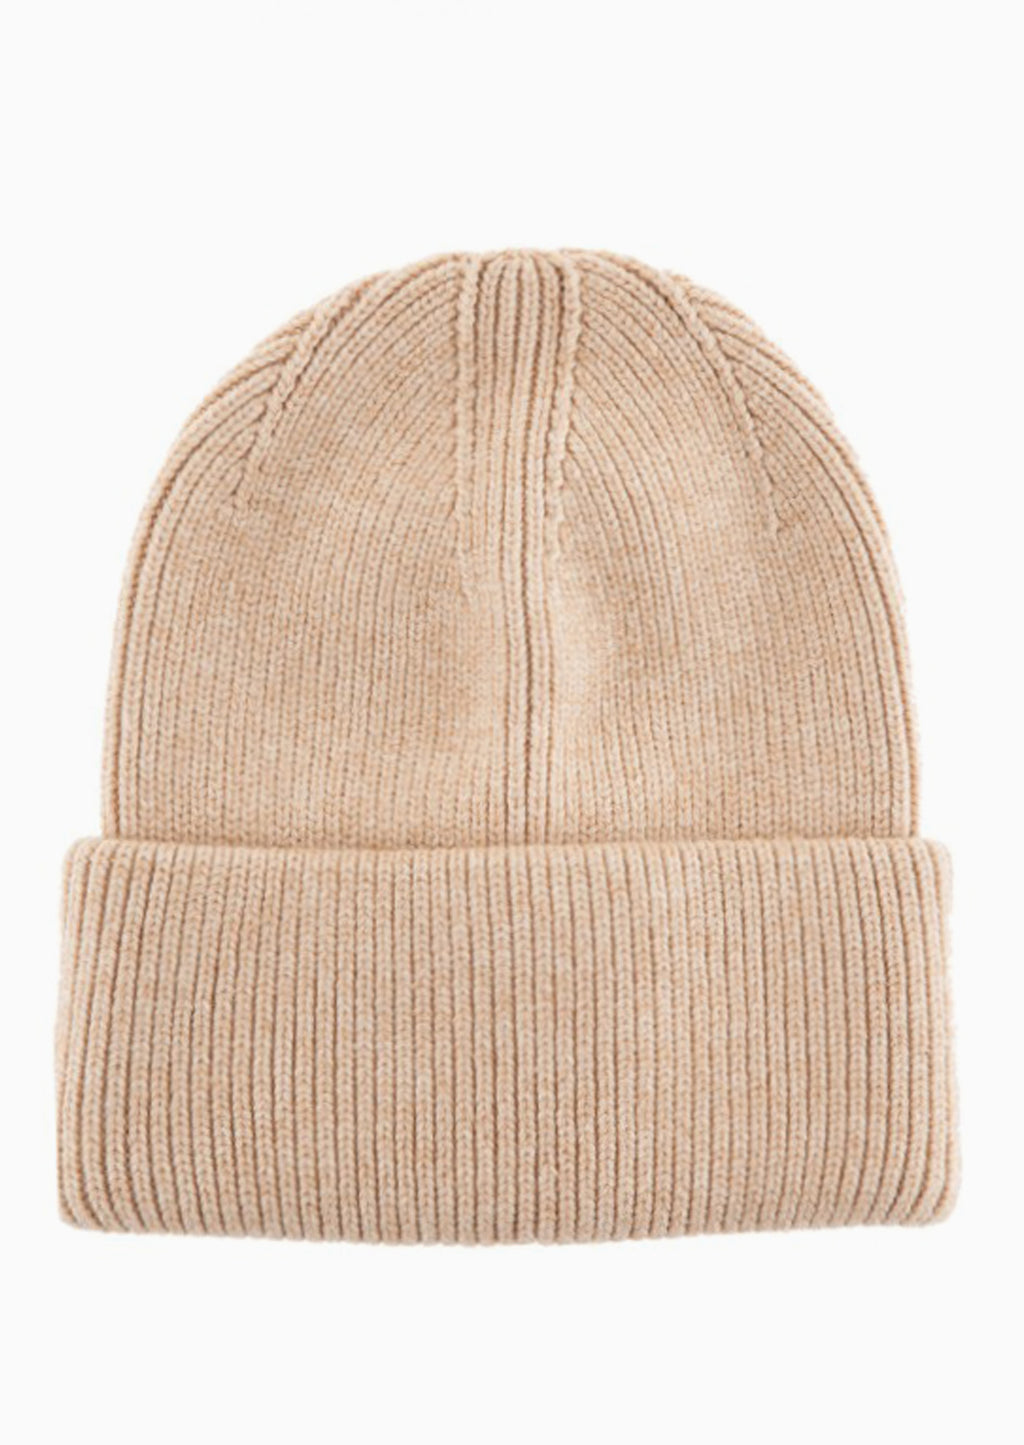 Oatmeal: A knit beanie with oversized cuff in oatmeal color.